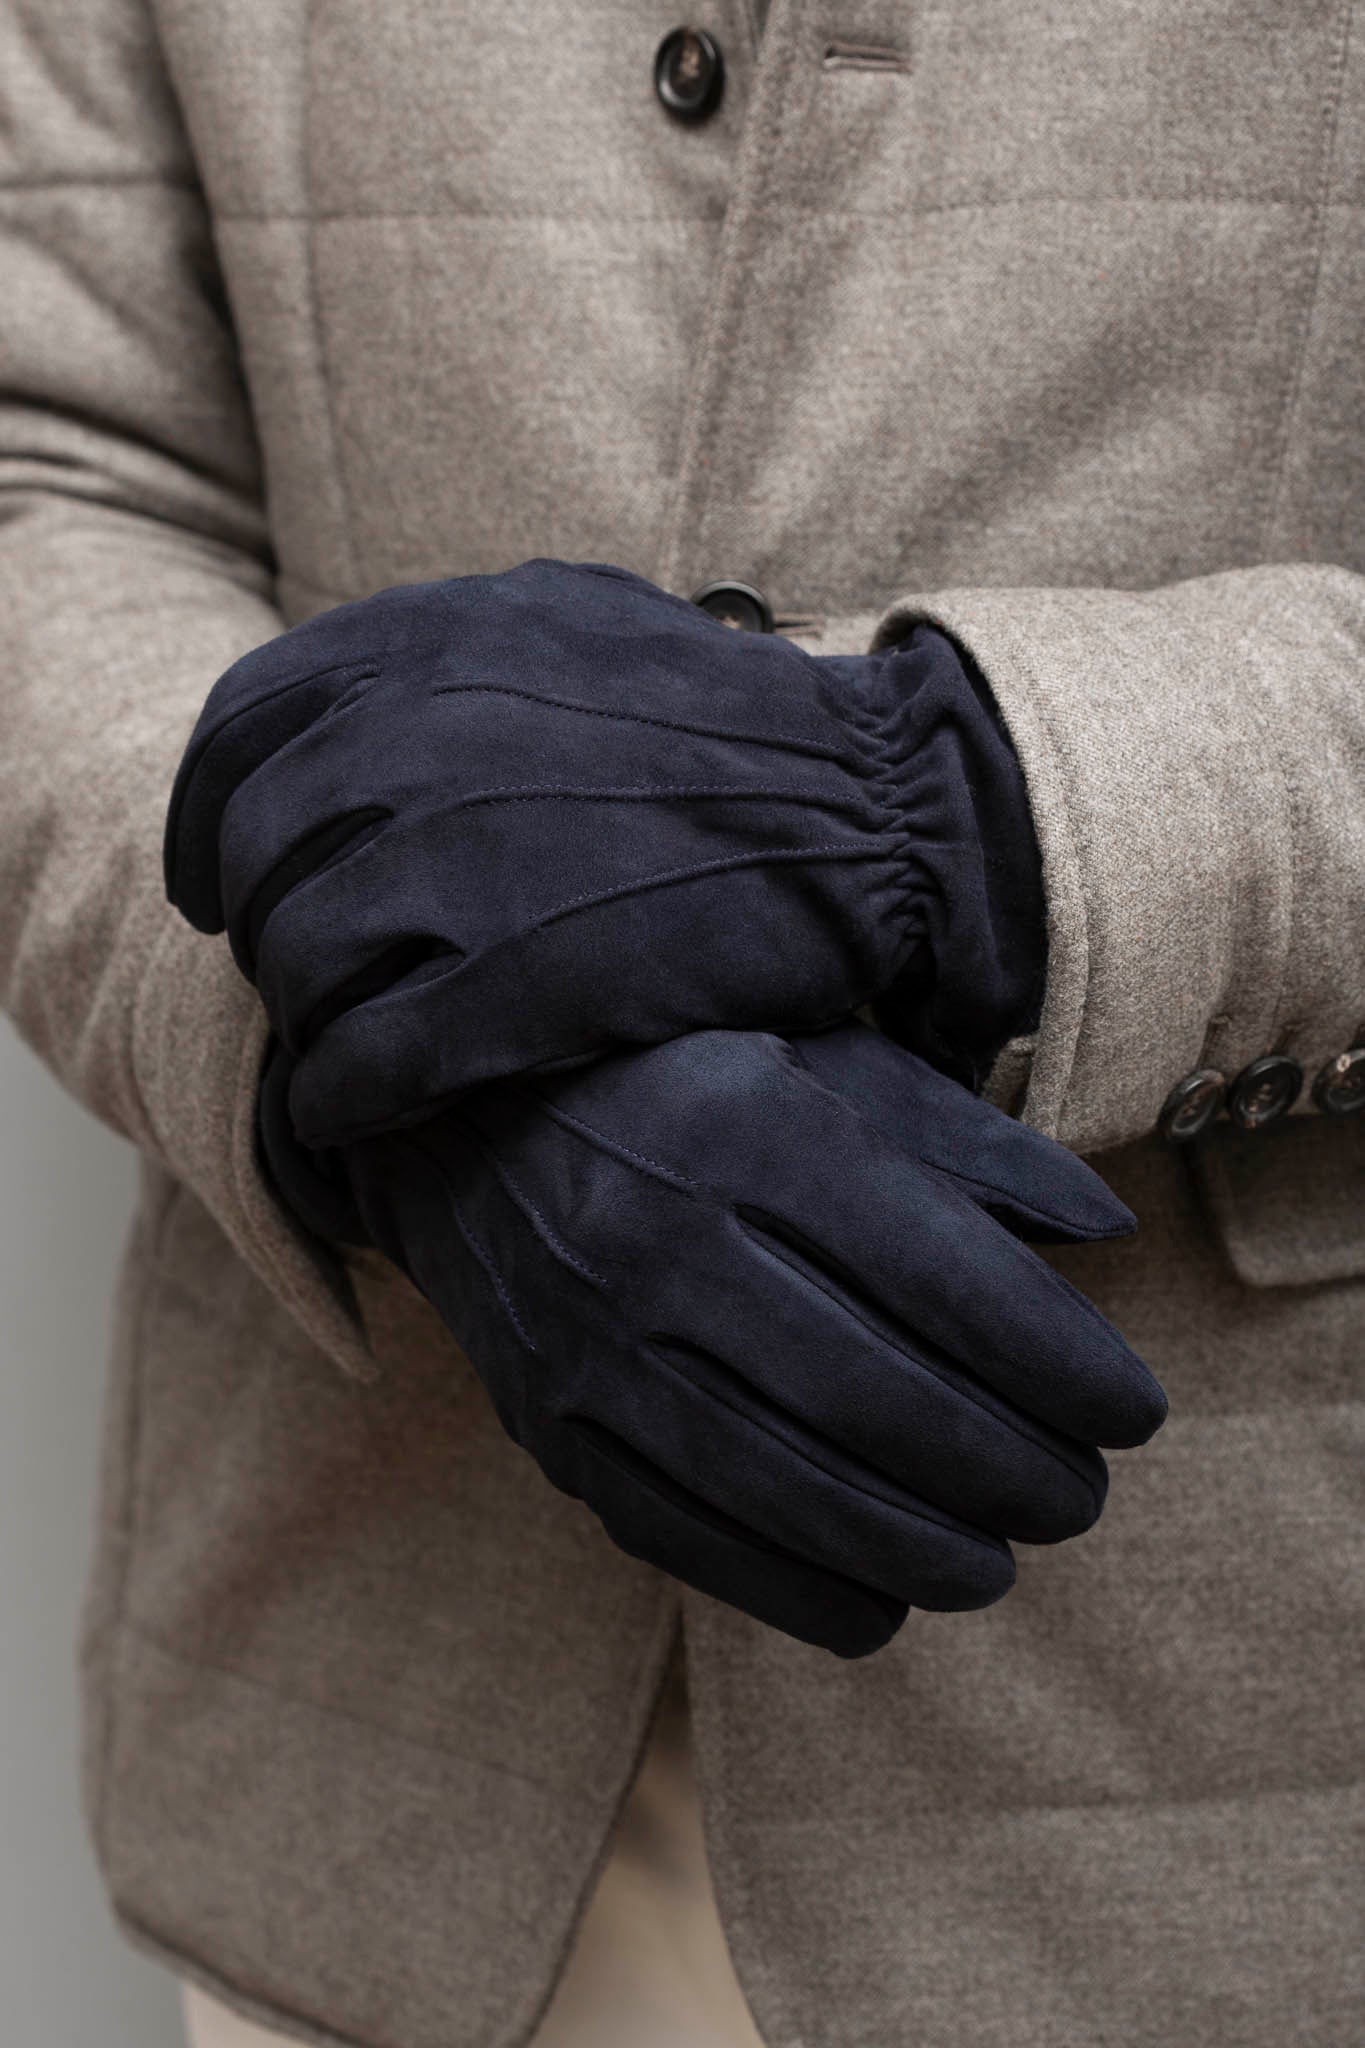 Blue Cashmere Lined Suede Gloves - Made in Italy